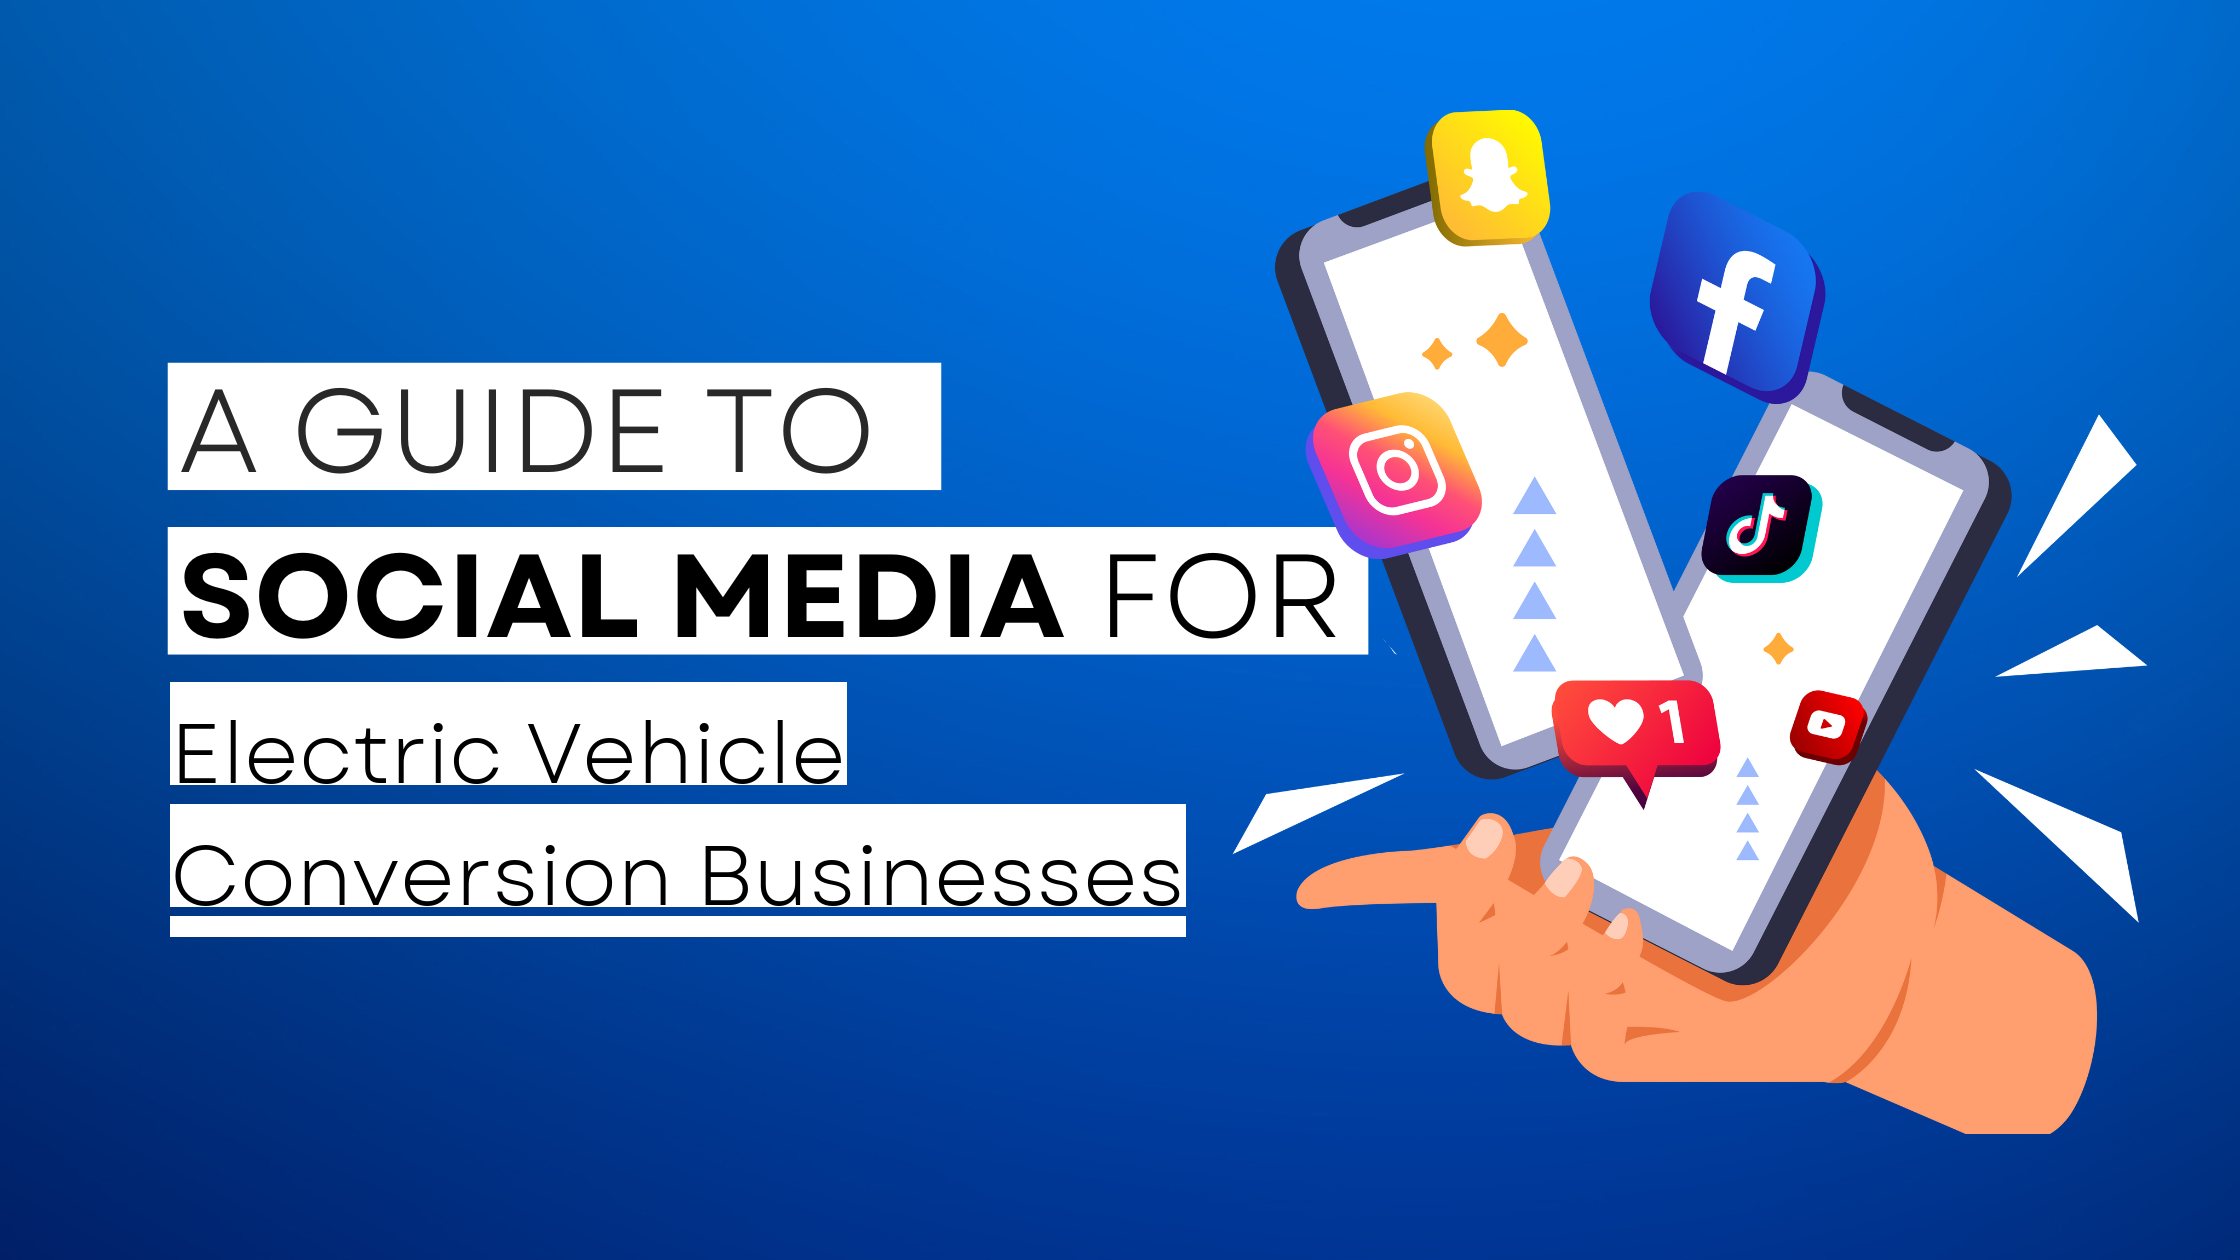 How to start Electric Vehicle Conversion  on social media